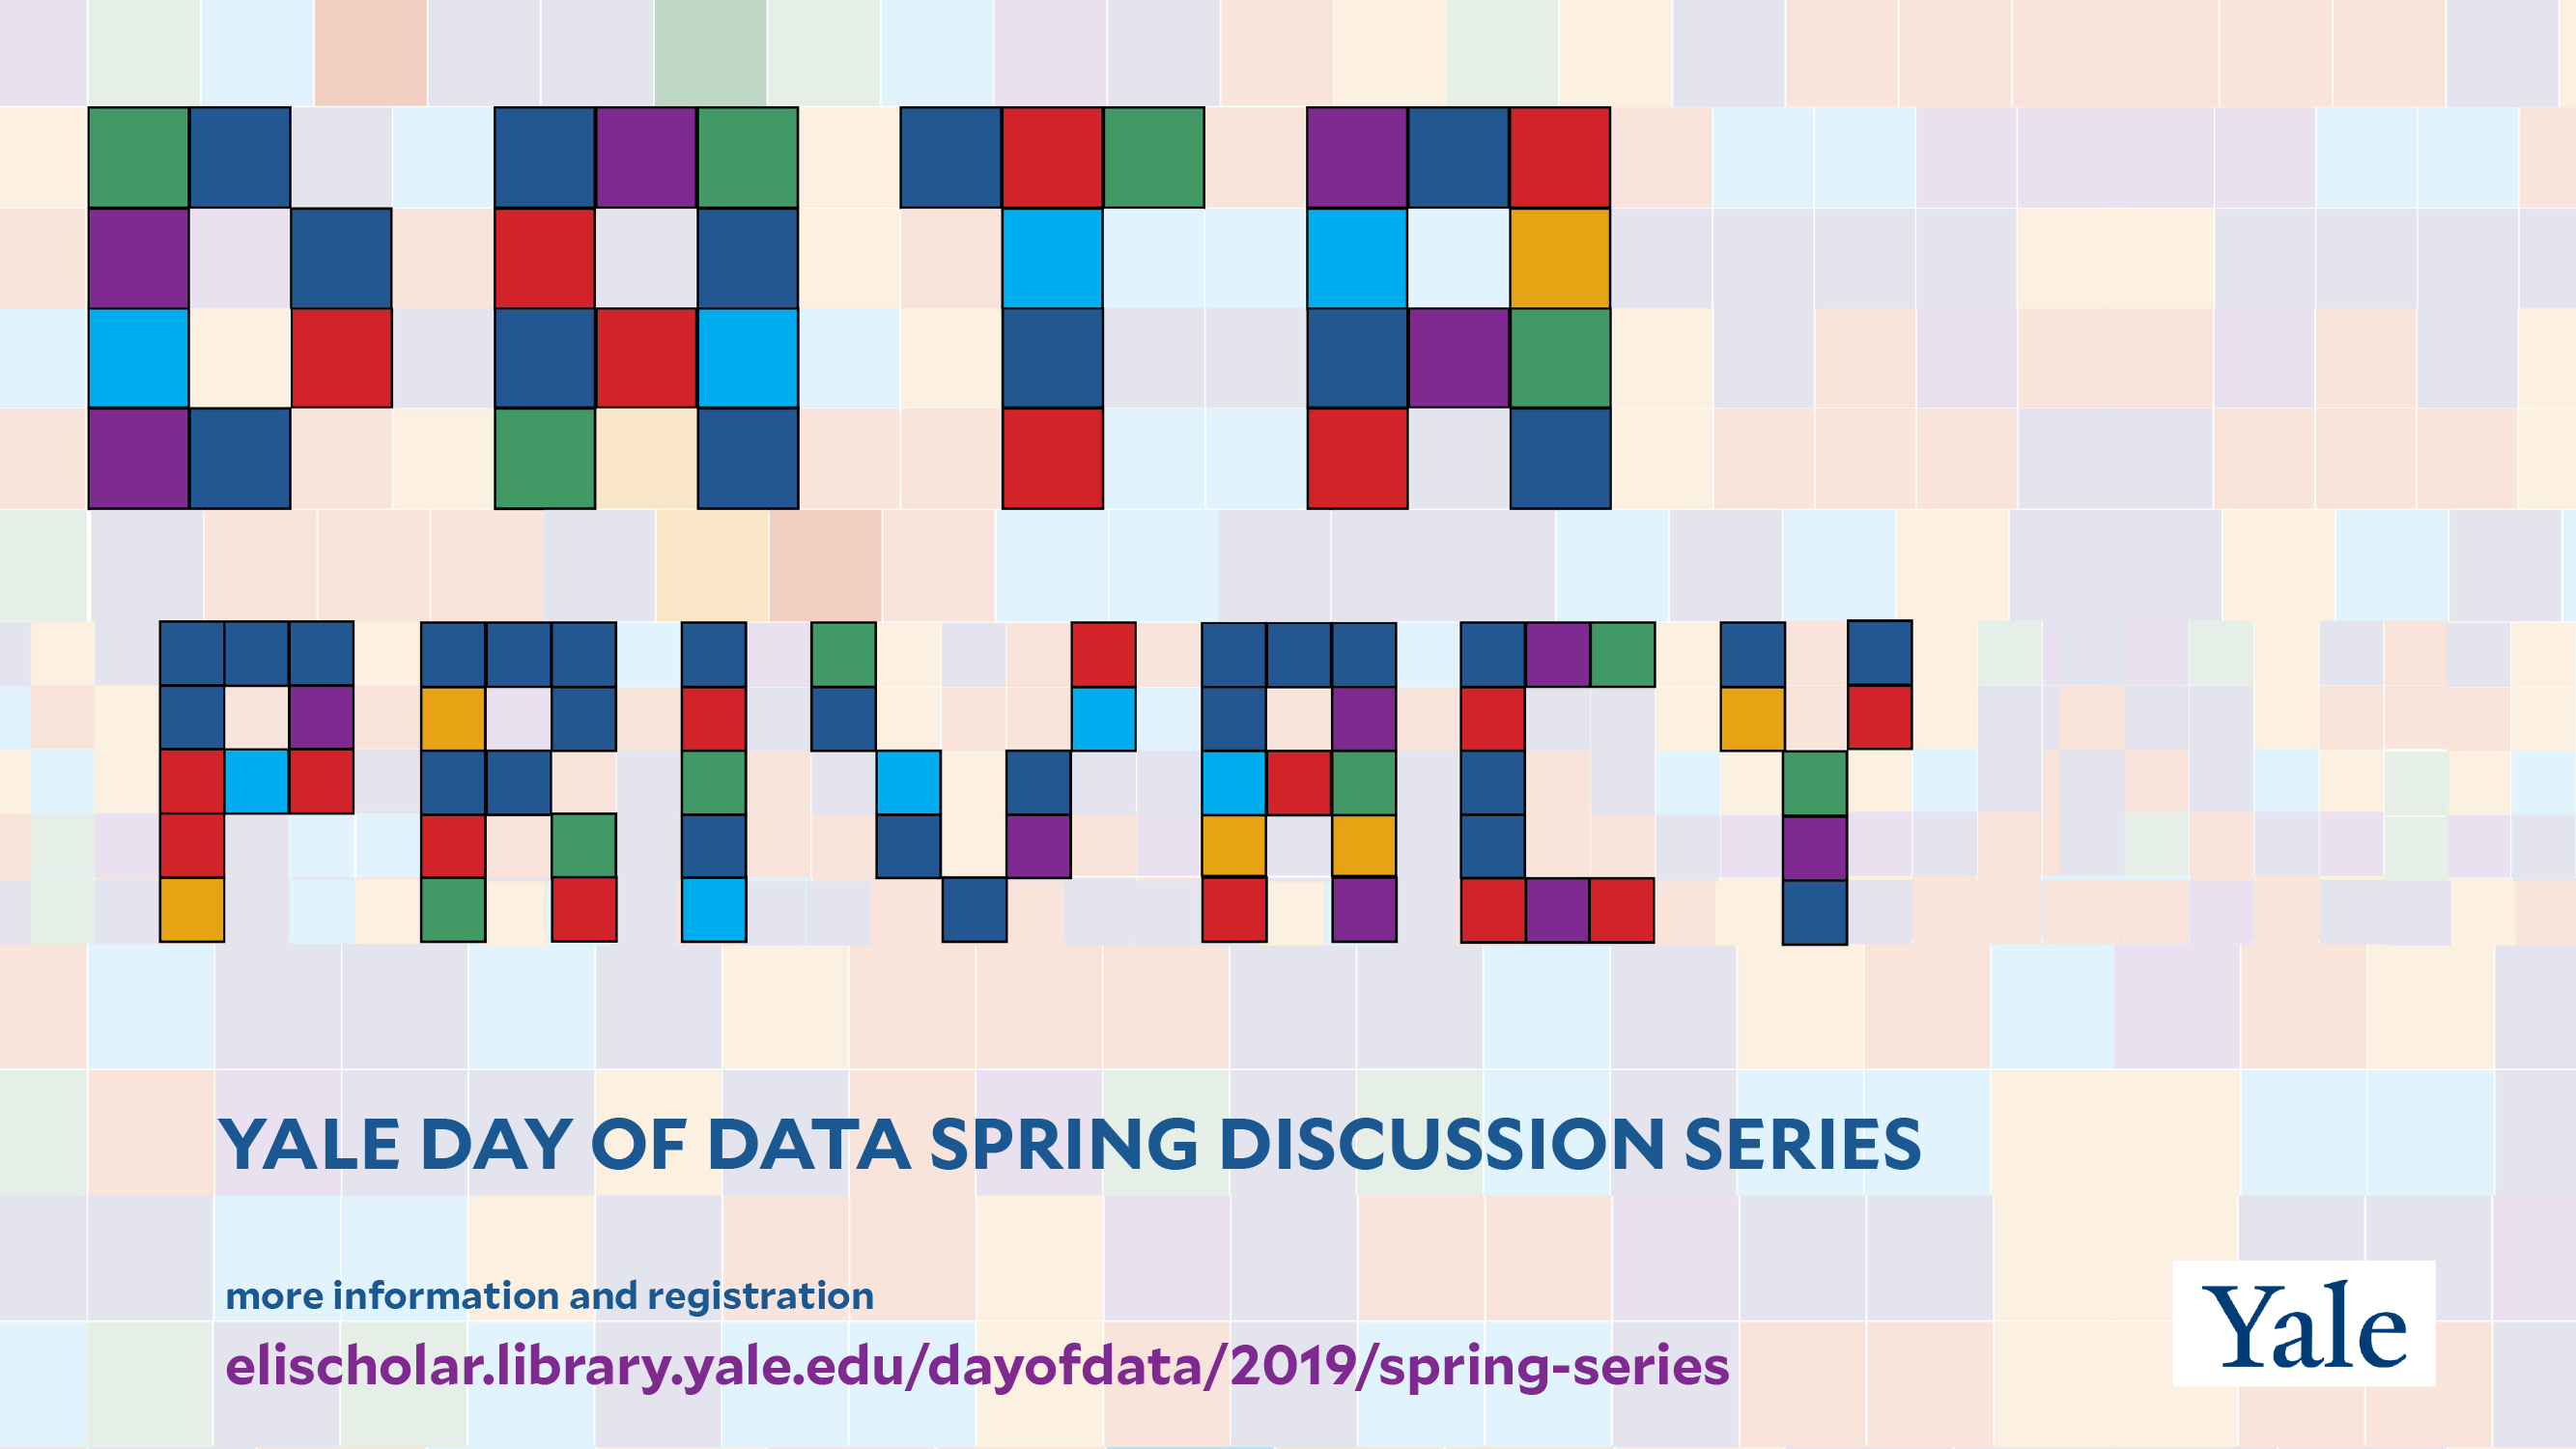 2020 Day of Data Spring Discussion Series